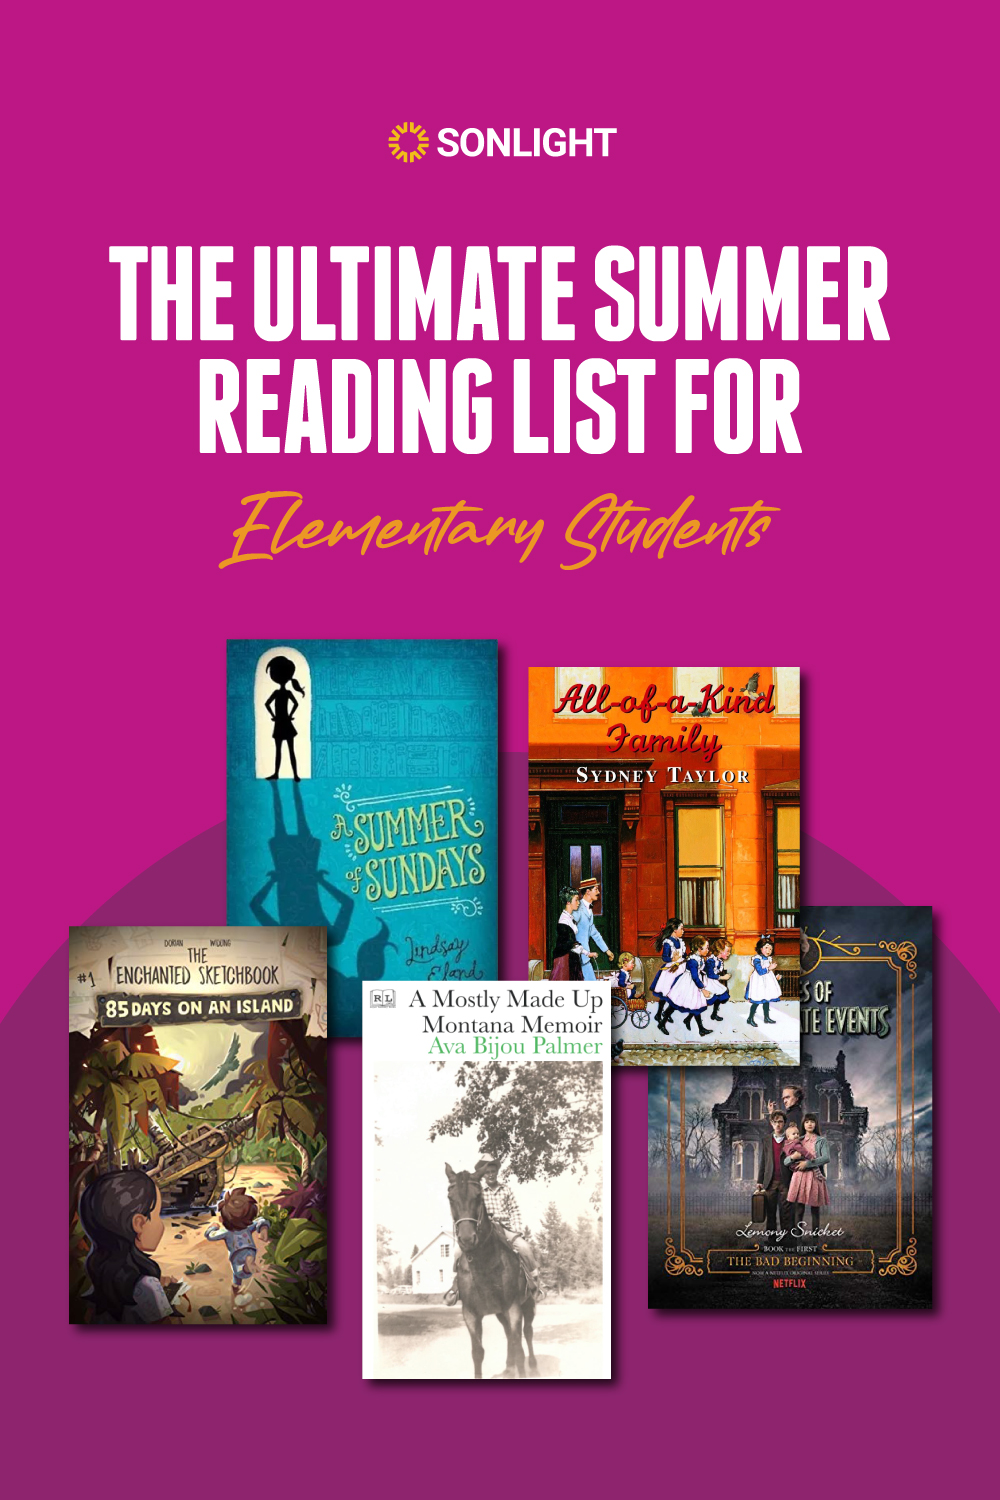 The Ultimate Summer Reading List For Elementary Students